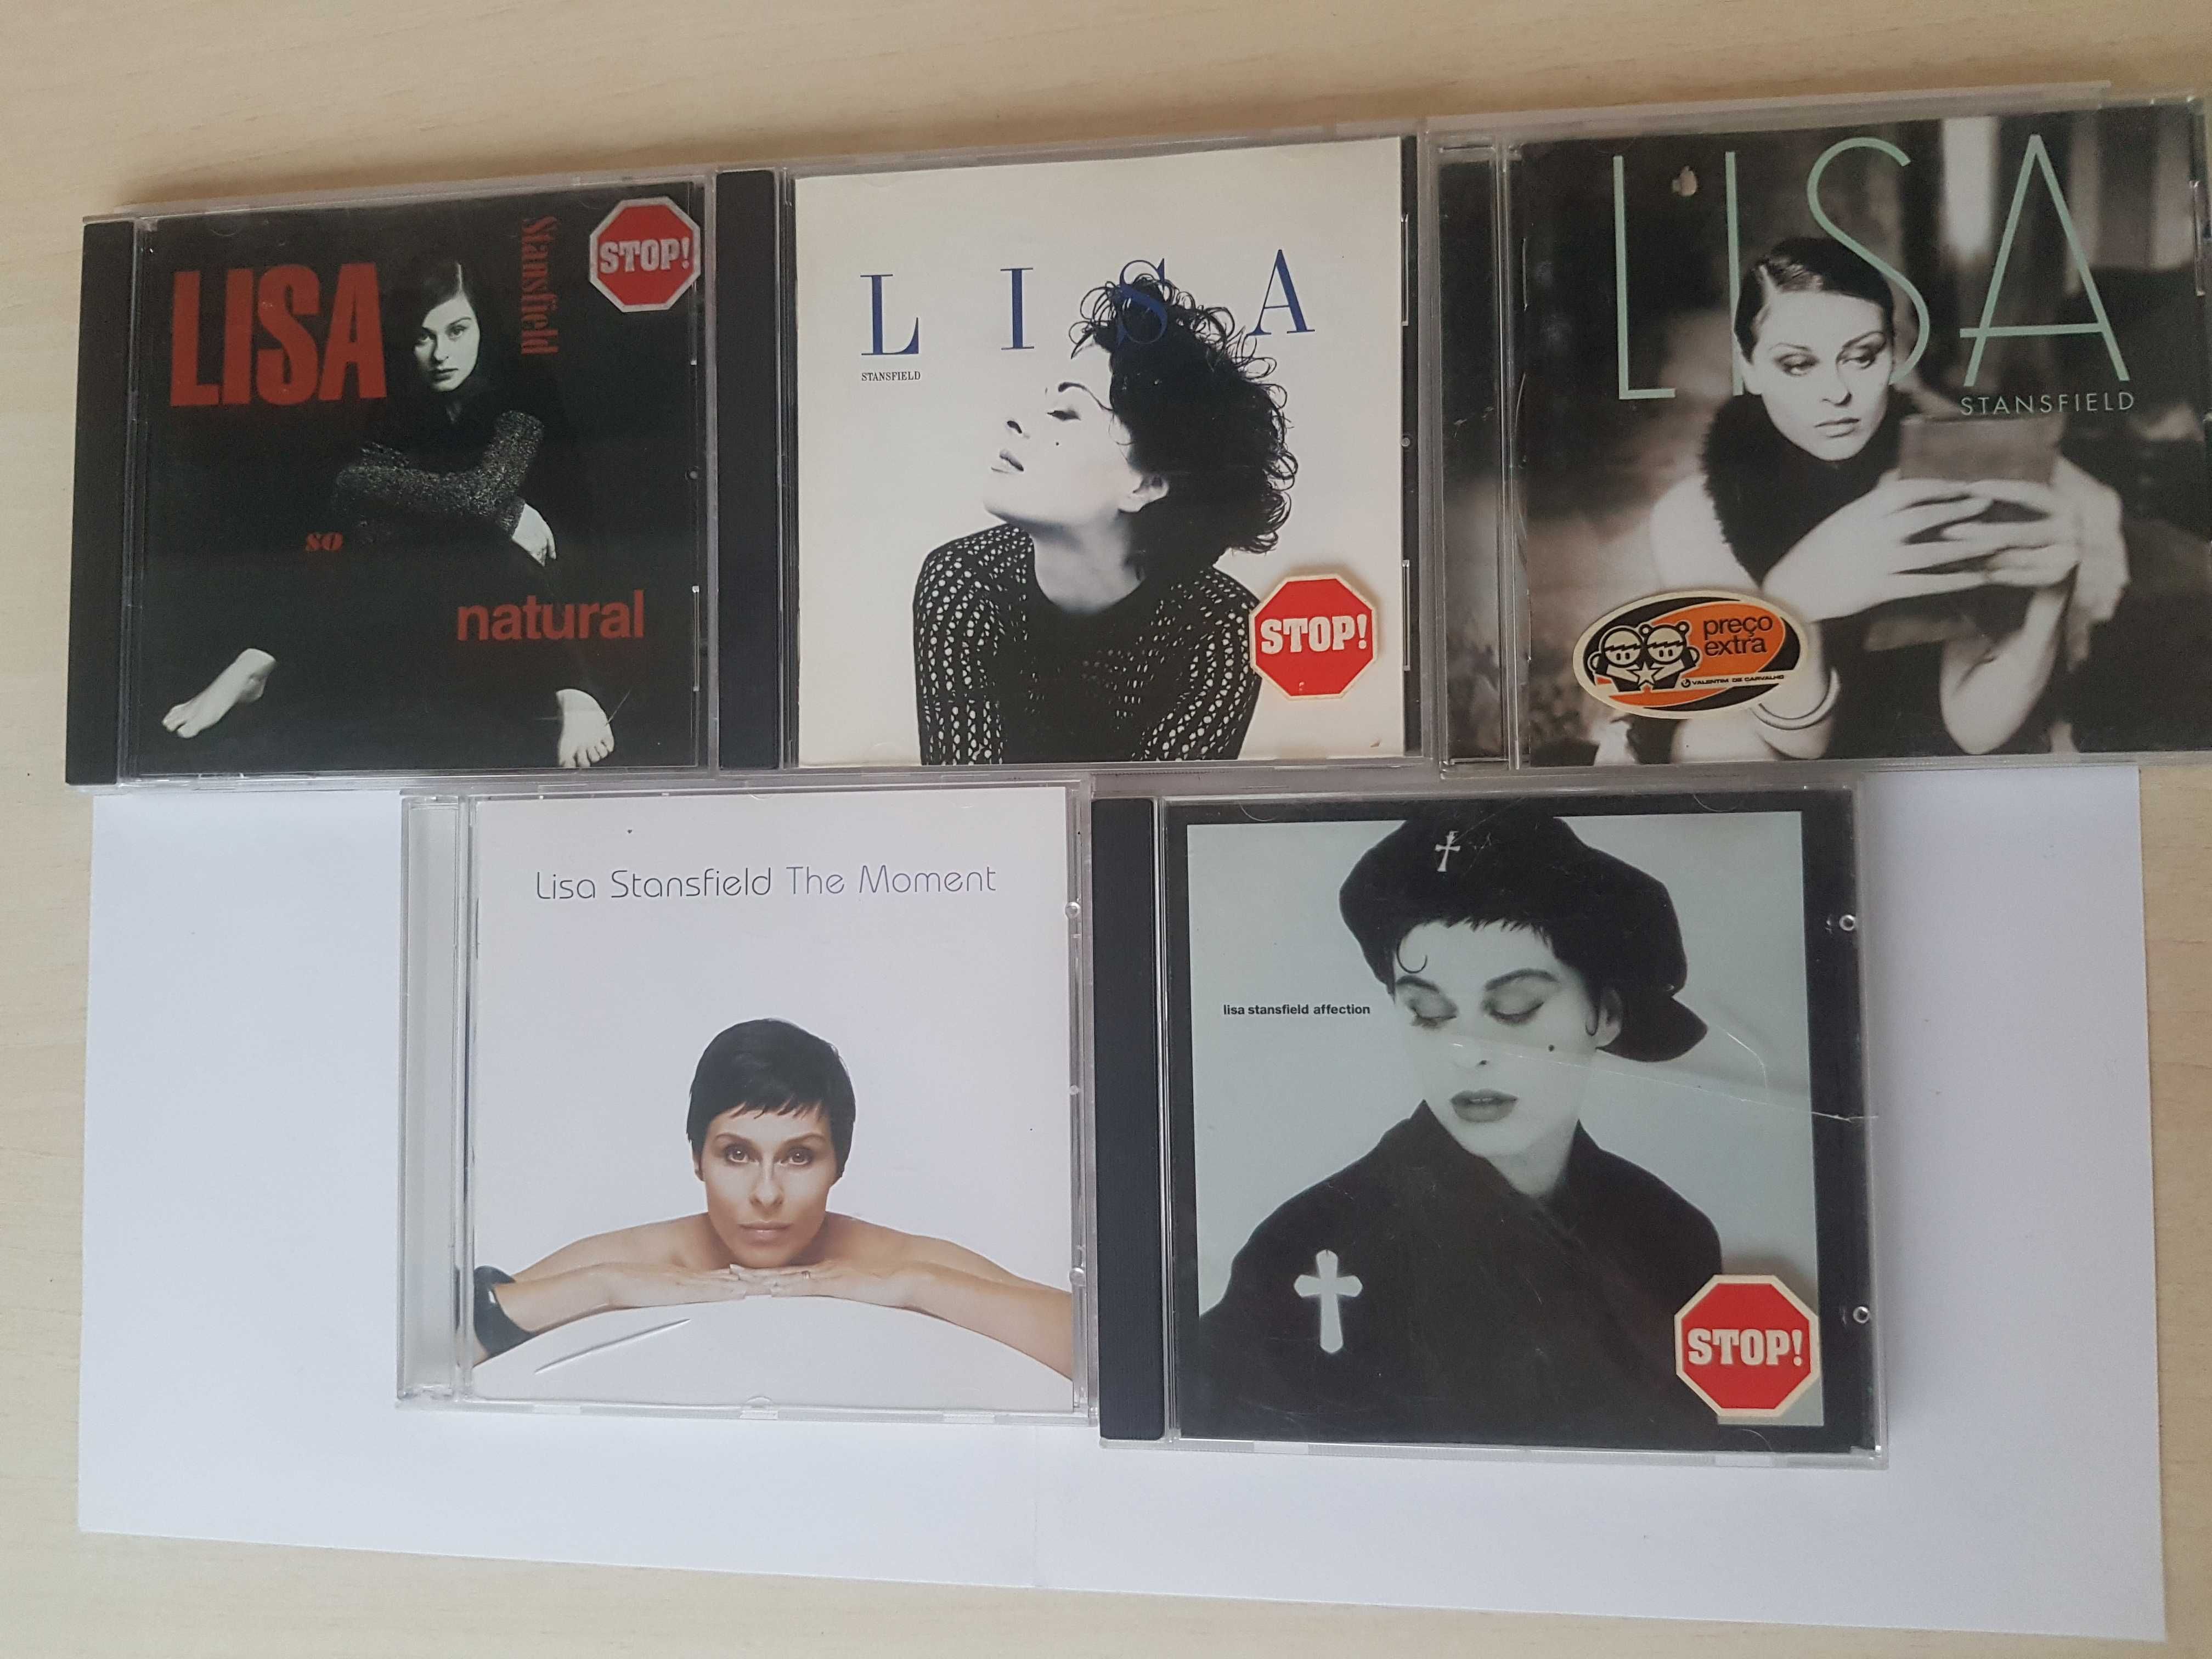 5 CD 's Lisa Stansfield - Total 10 euros